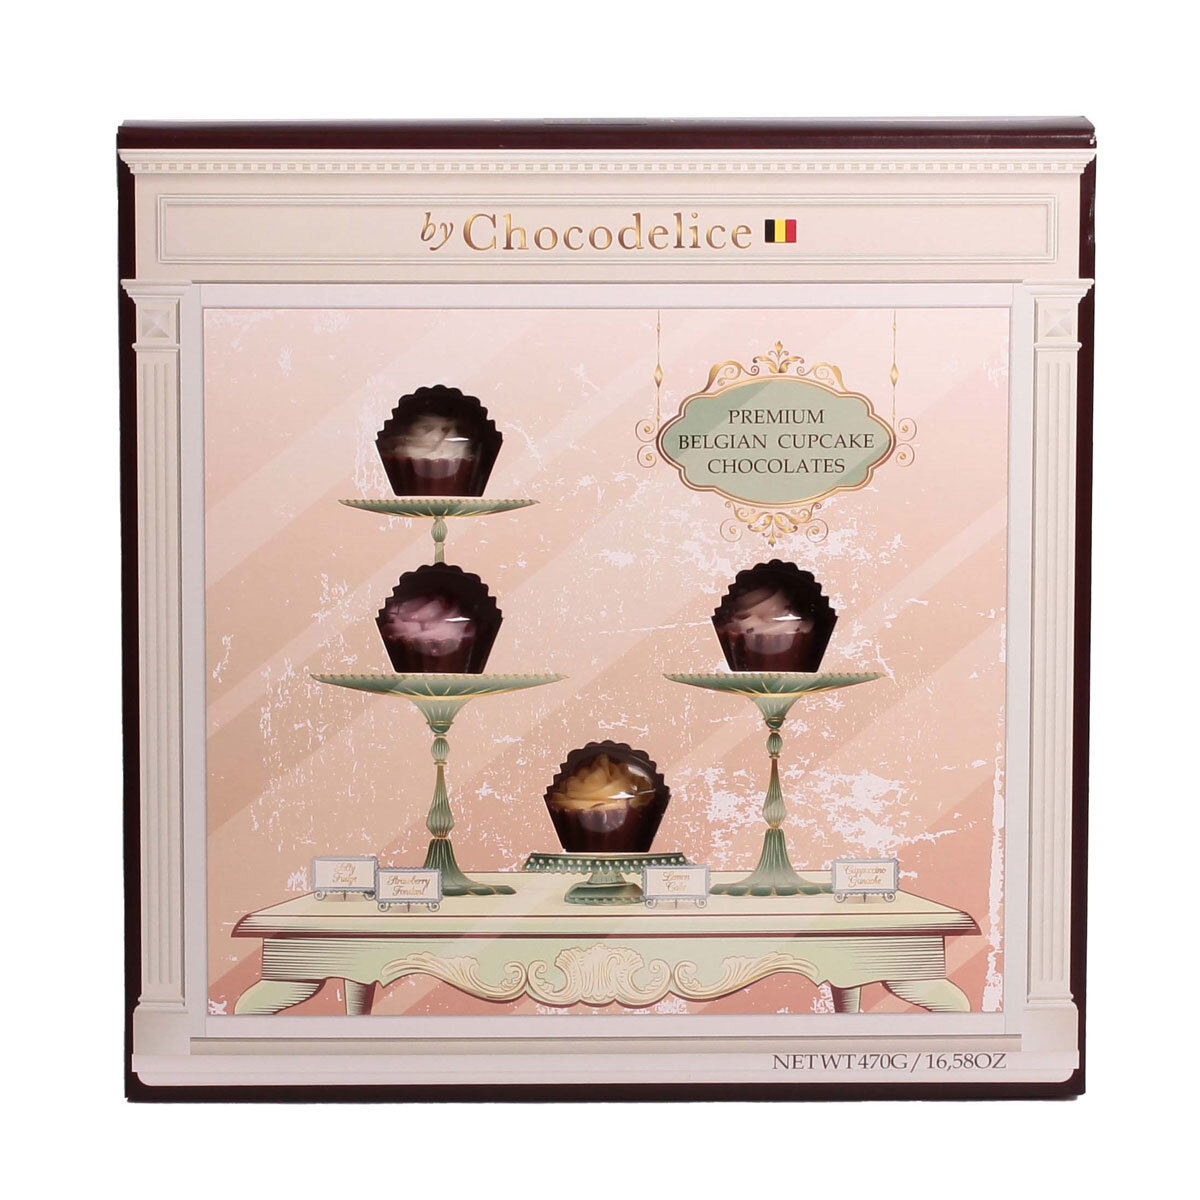 Cut out image of packaged chocolates on white background